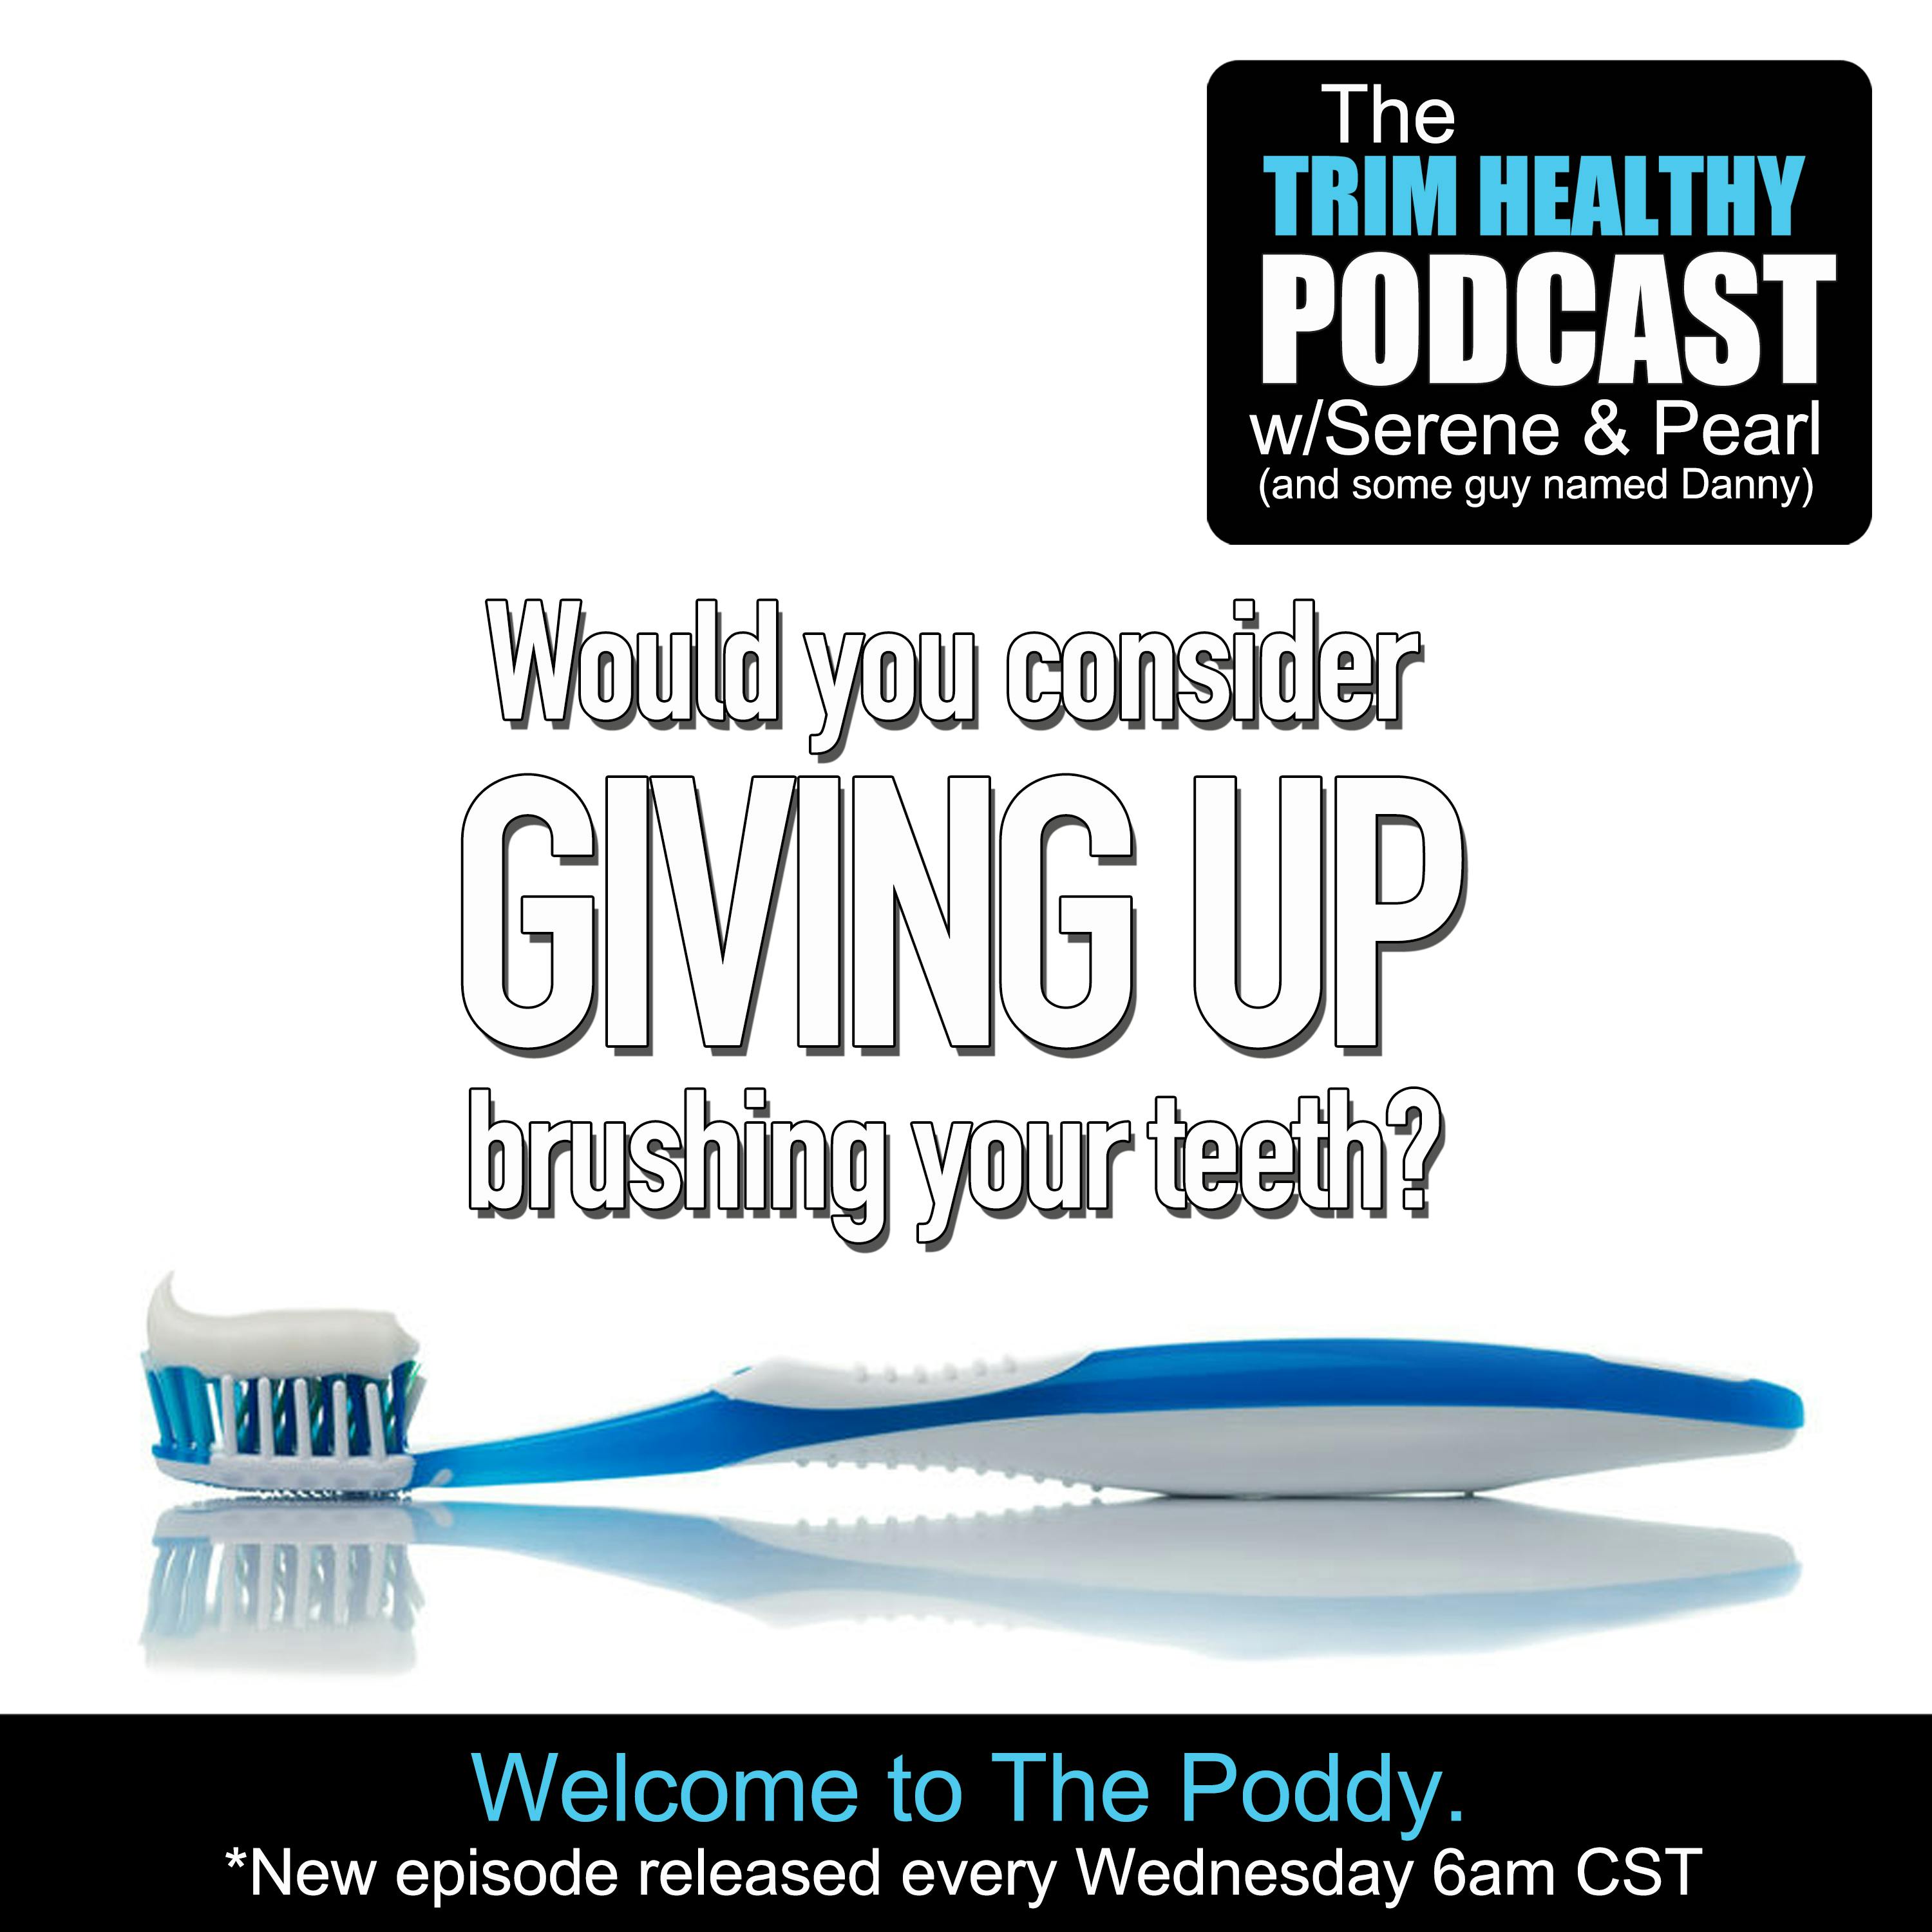 Ep 197: Would You Consider Giving Up Brushing Your Teeth?